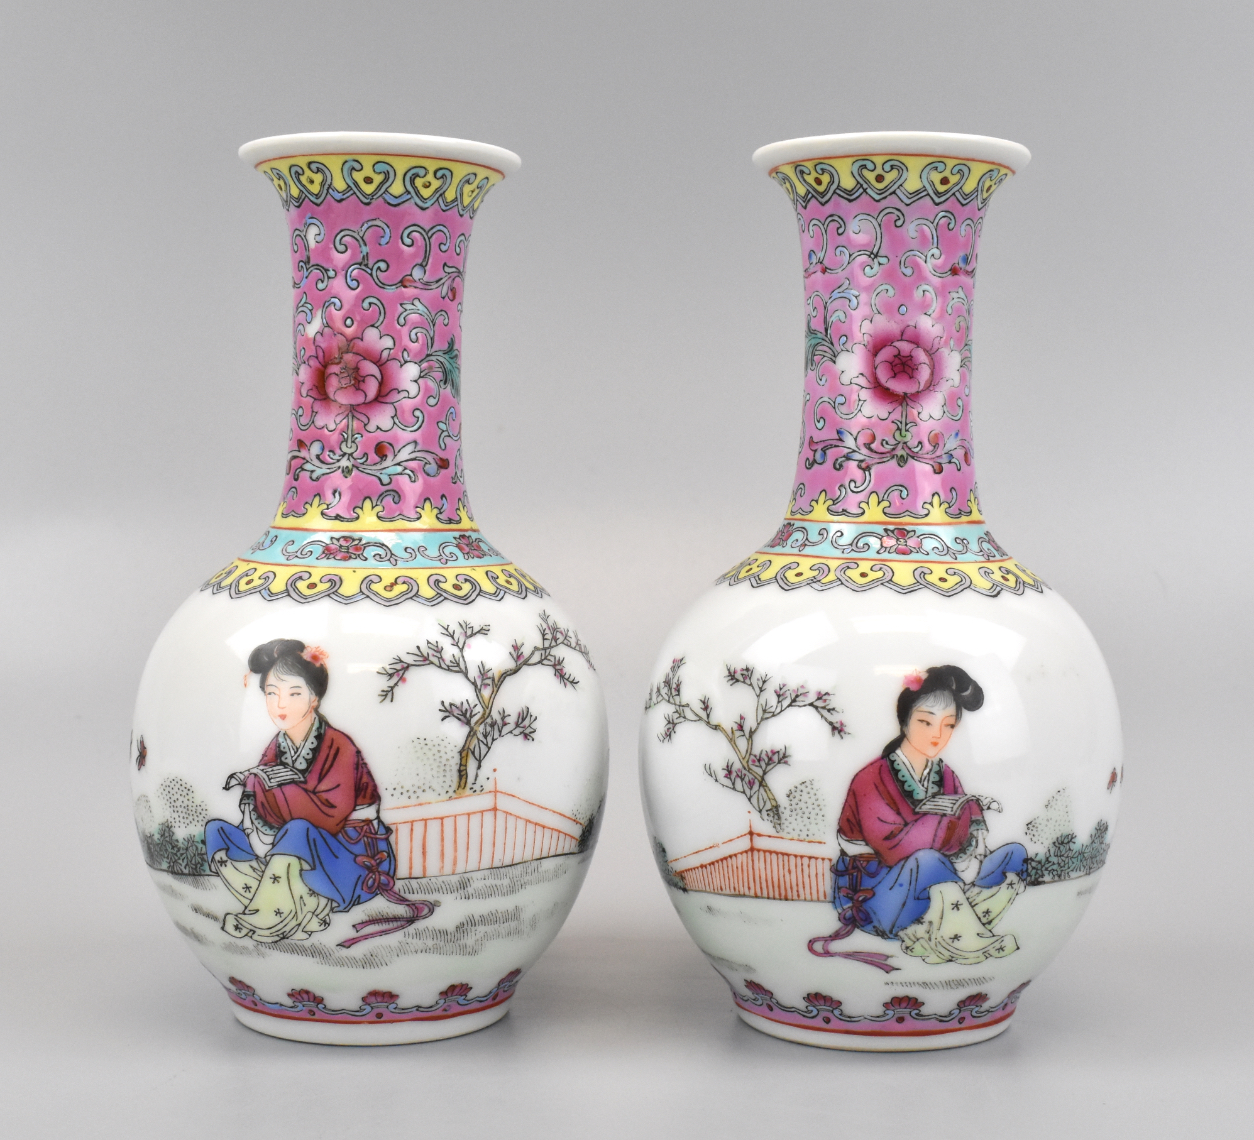 PAIR OF CHINESE FAMILLE ROSE VASES 339c53